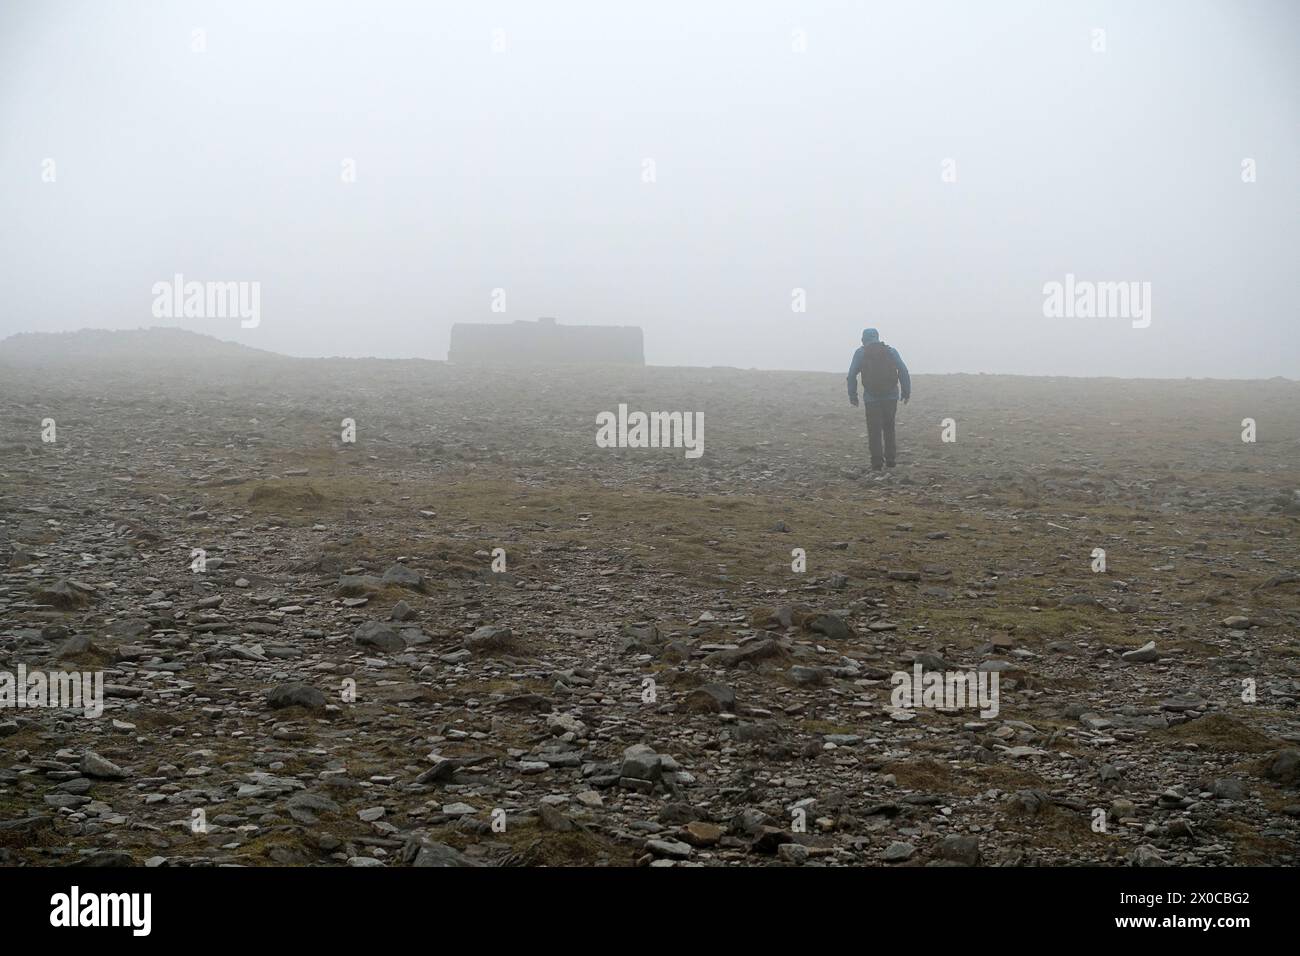 Man (Hiker) Walking to the Summit Shelter in Mist/Cloud on Ingleborough Mountain on the 3 Peaks in the Yorkshire Dales National Park, England, UK. Stock Photo